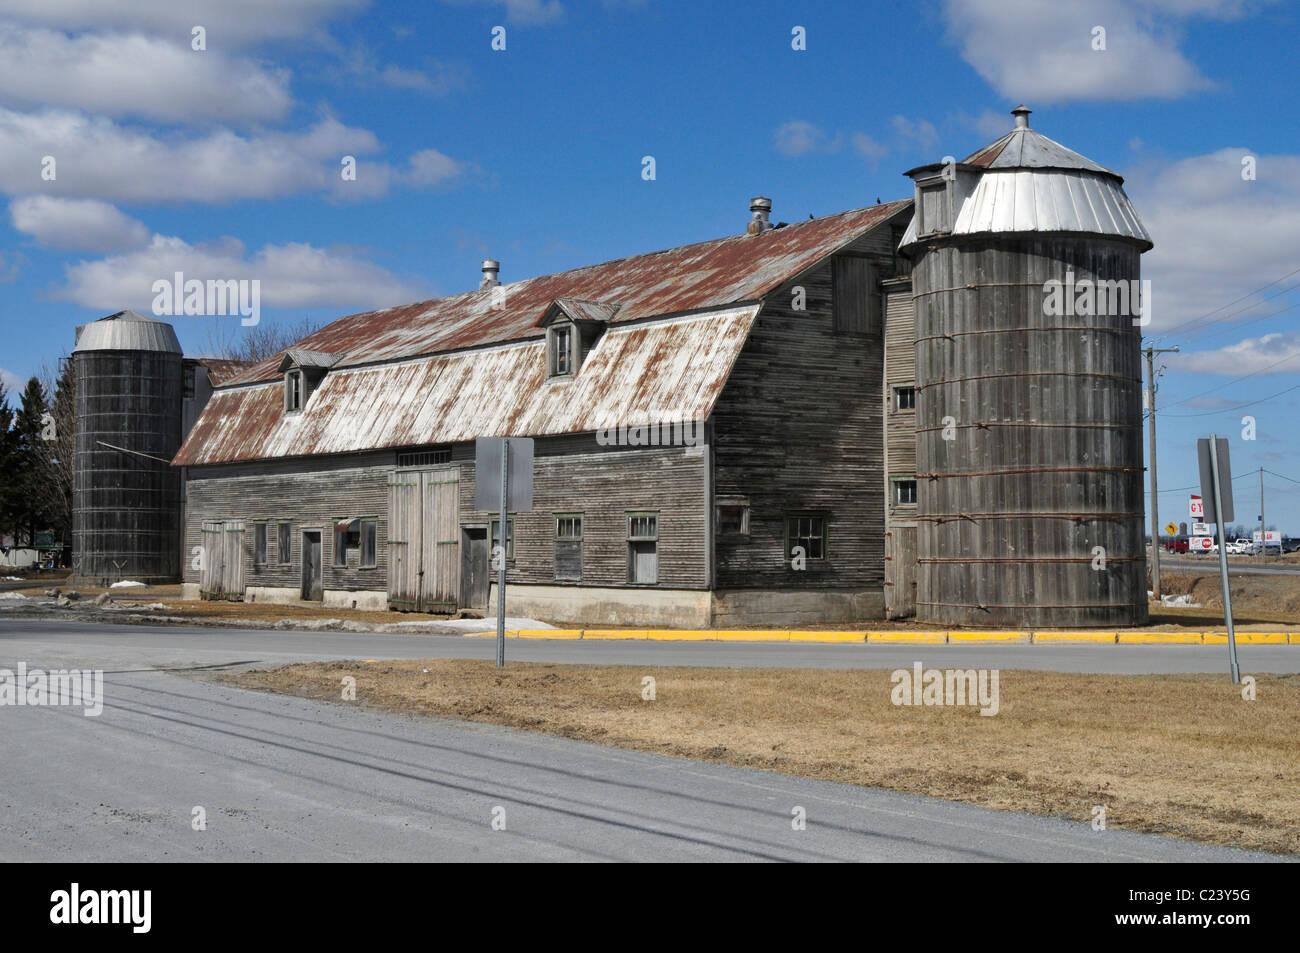 Abandoned grain/ farm house with silo in Quebec, Canada. Stock Photo